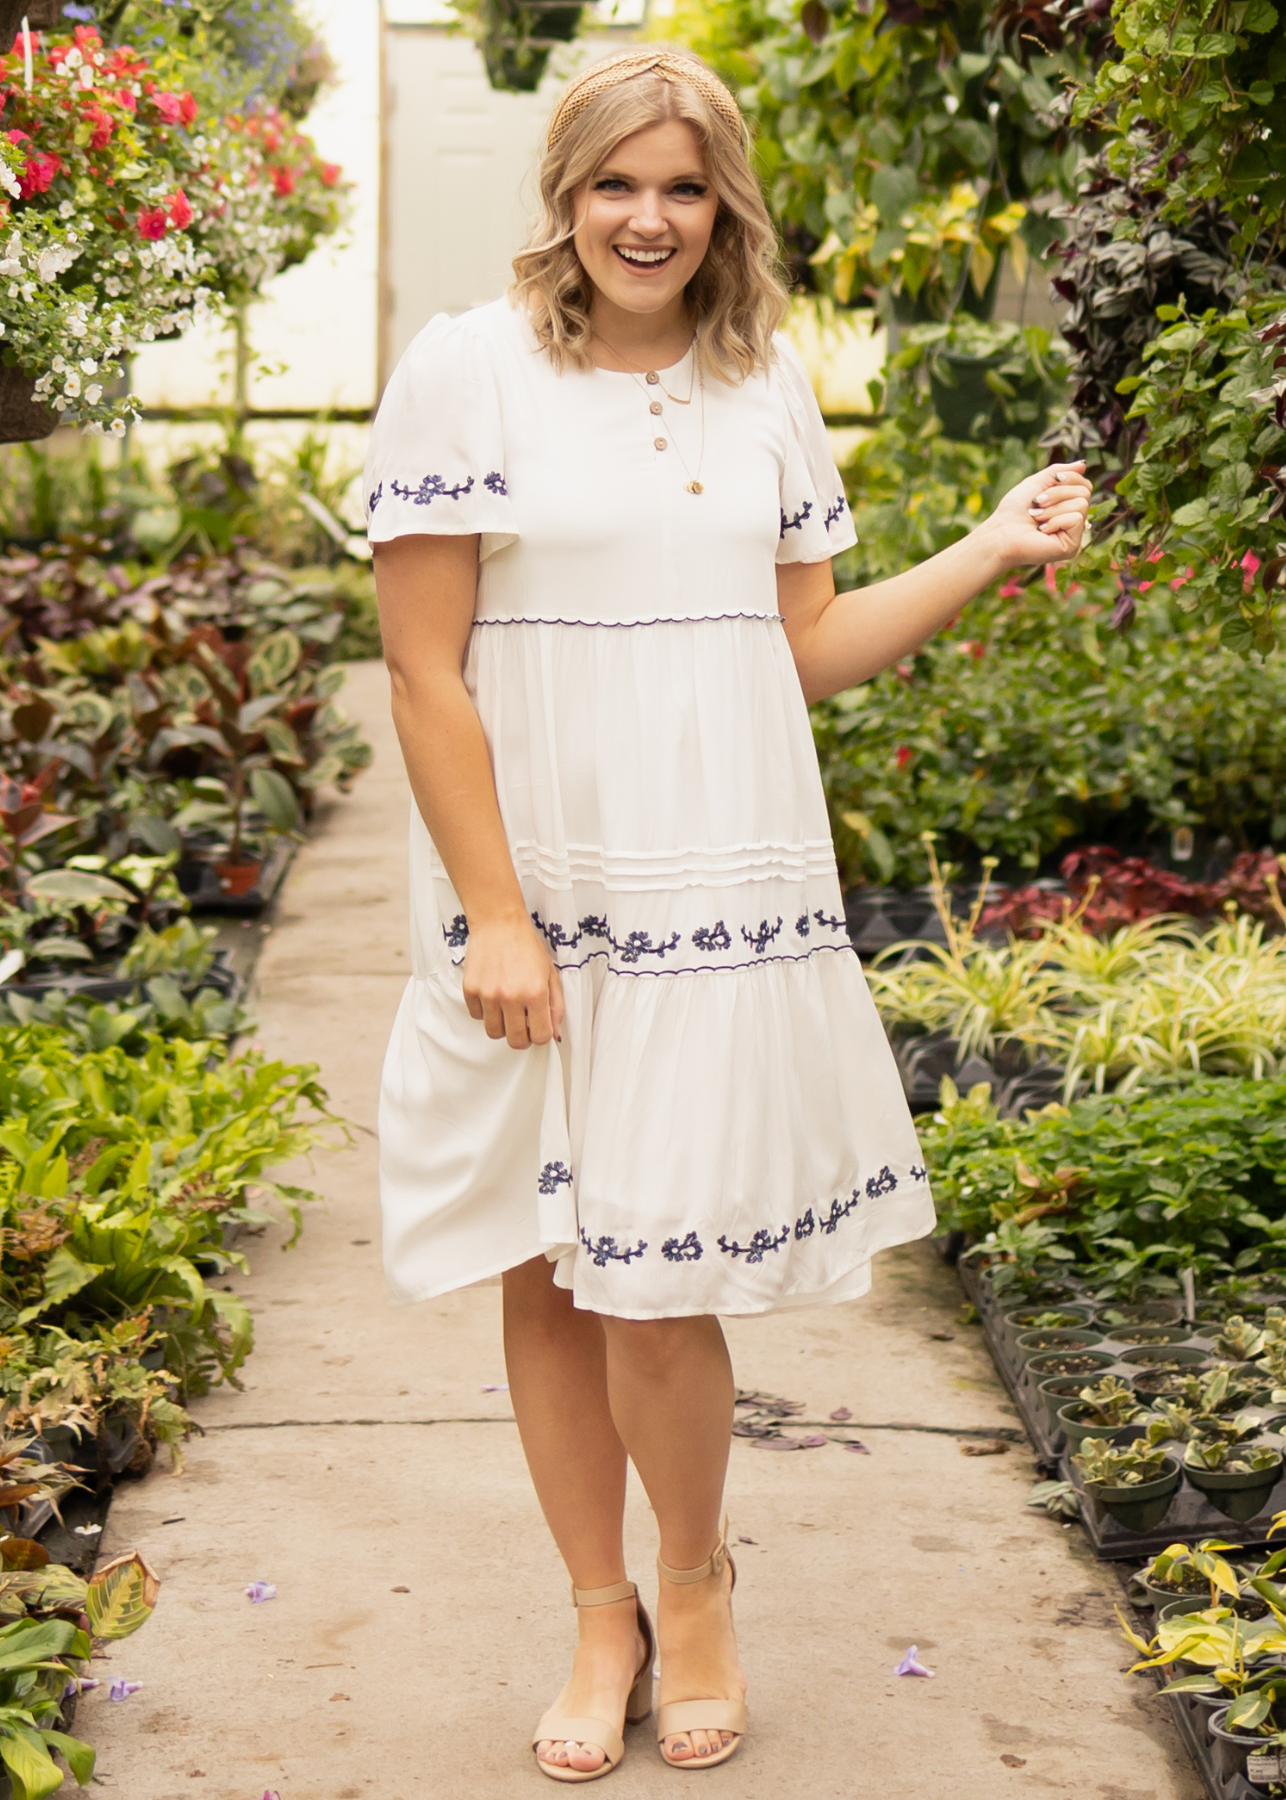 Short sleeve white dress with blue embroidery